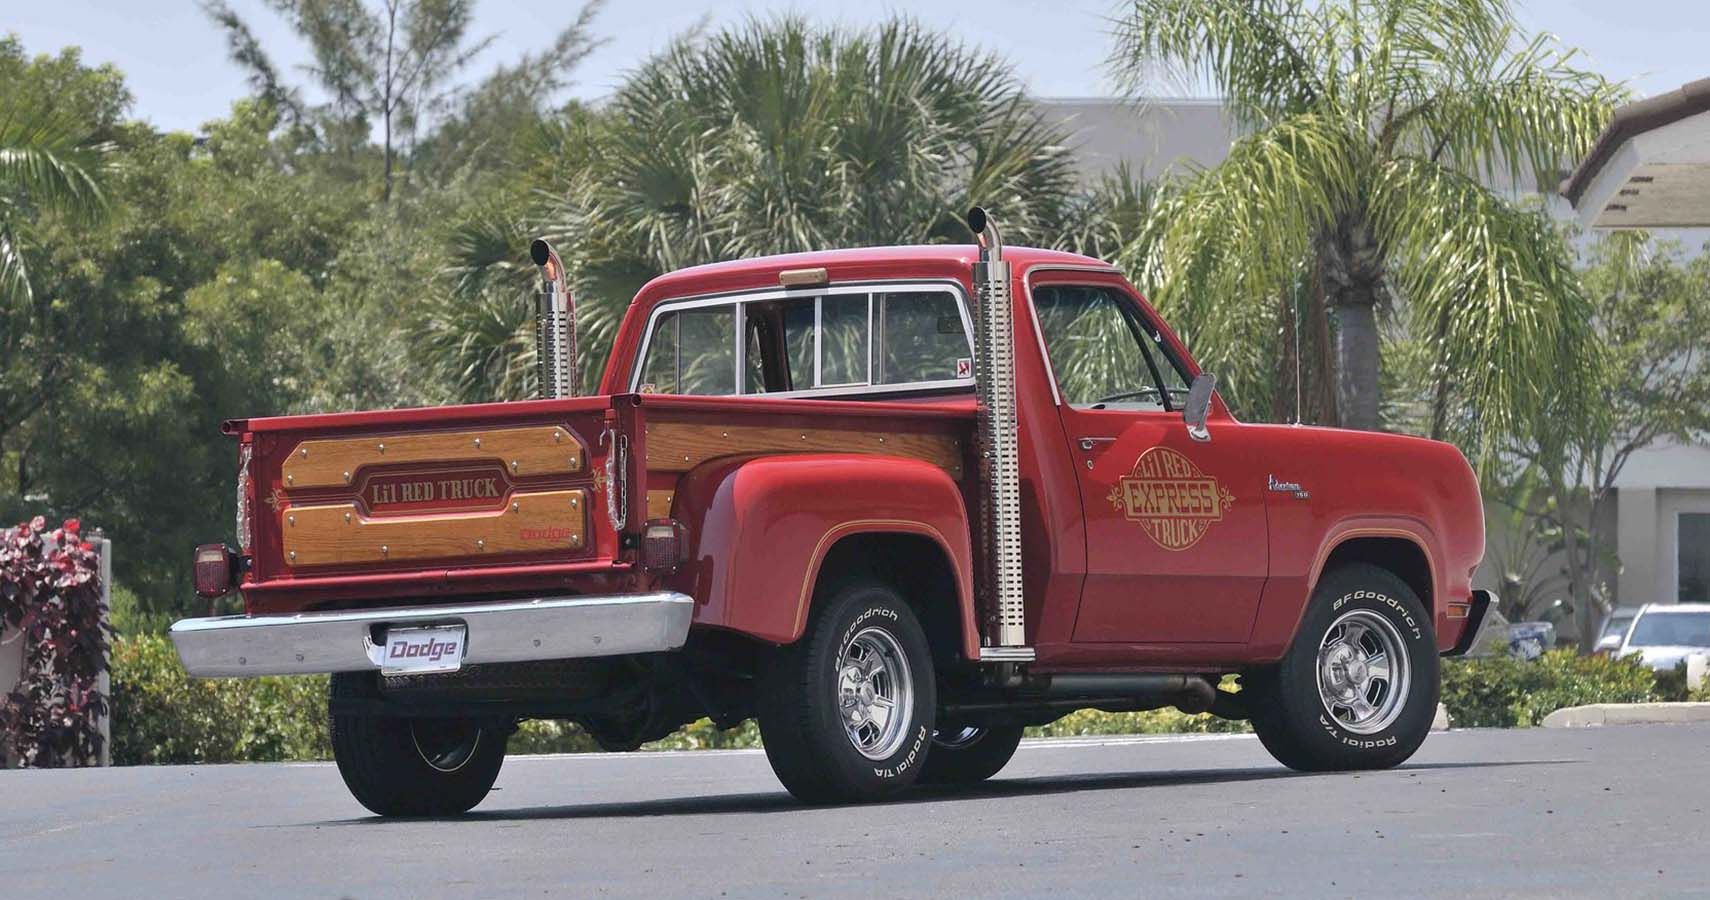 In 1979, The Lil Red Blur, As Many Dubbed The Li'l Red Express Truck, Was Brought To An End